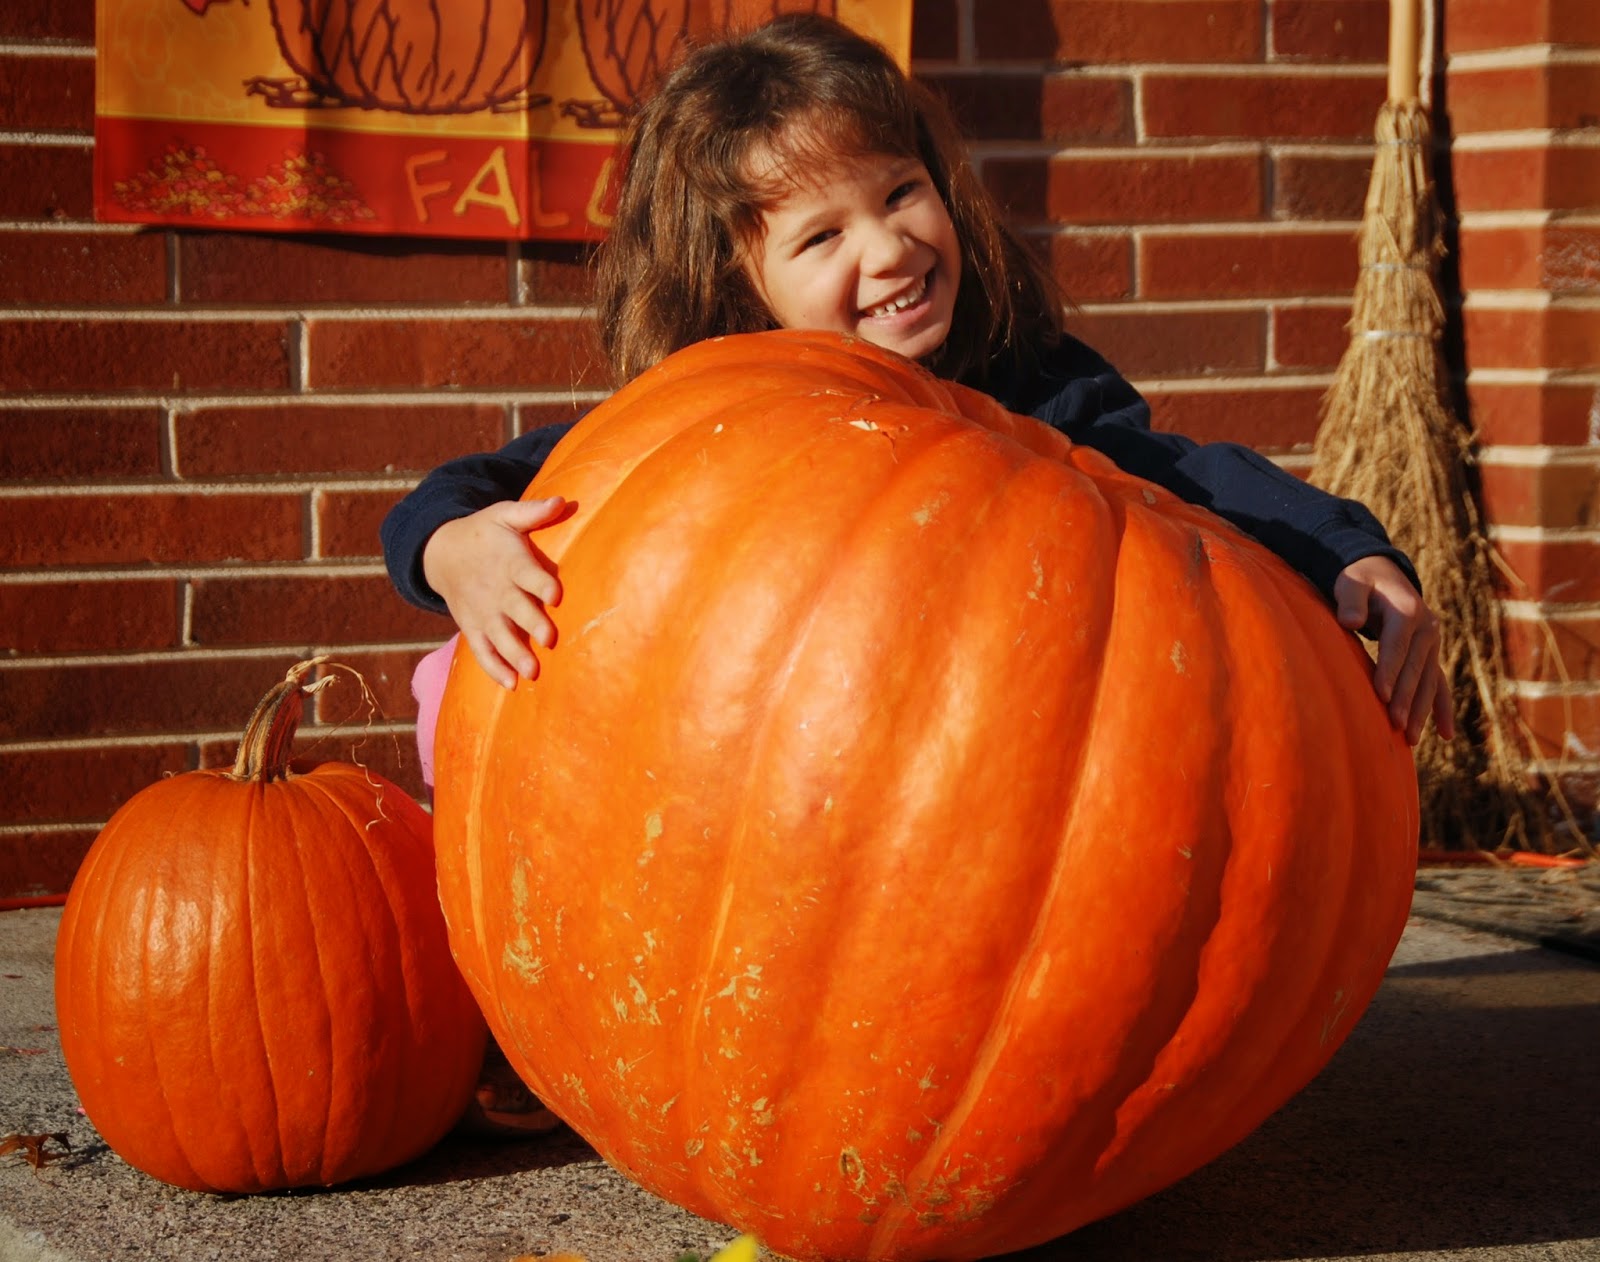 Girl posing with a large pumpkin for Halloween